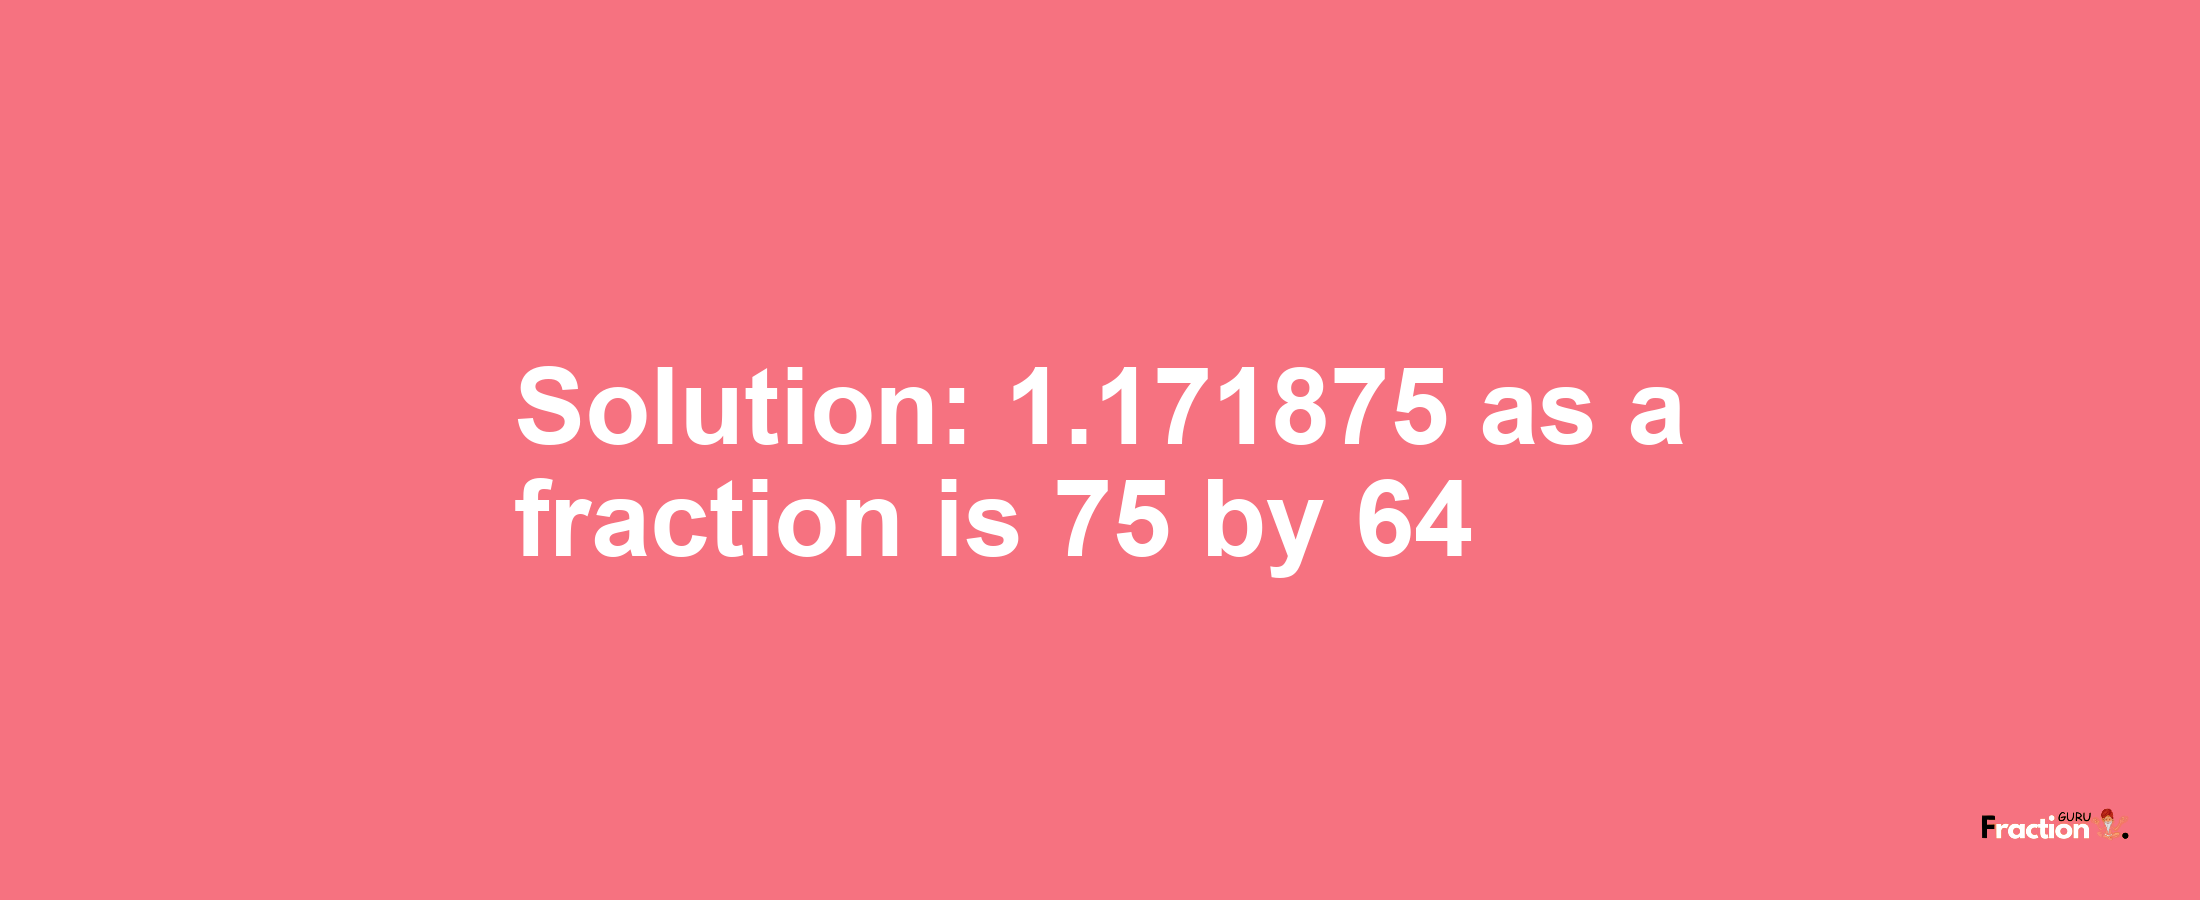 Solution:1.171875 as a fraction is 75/64